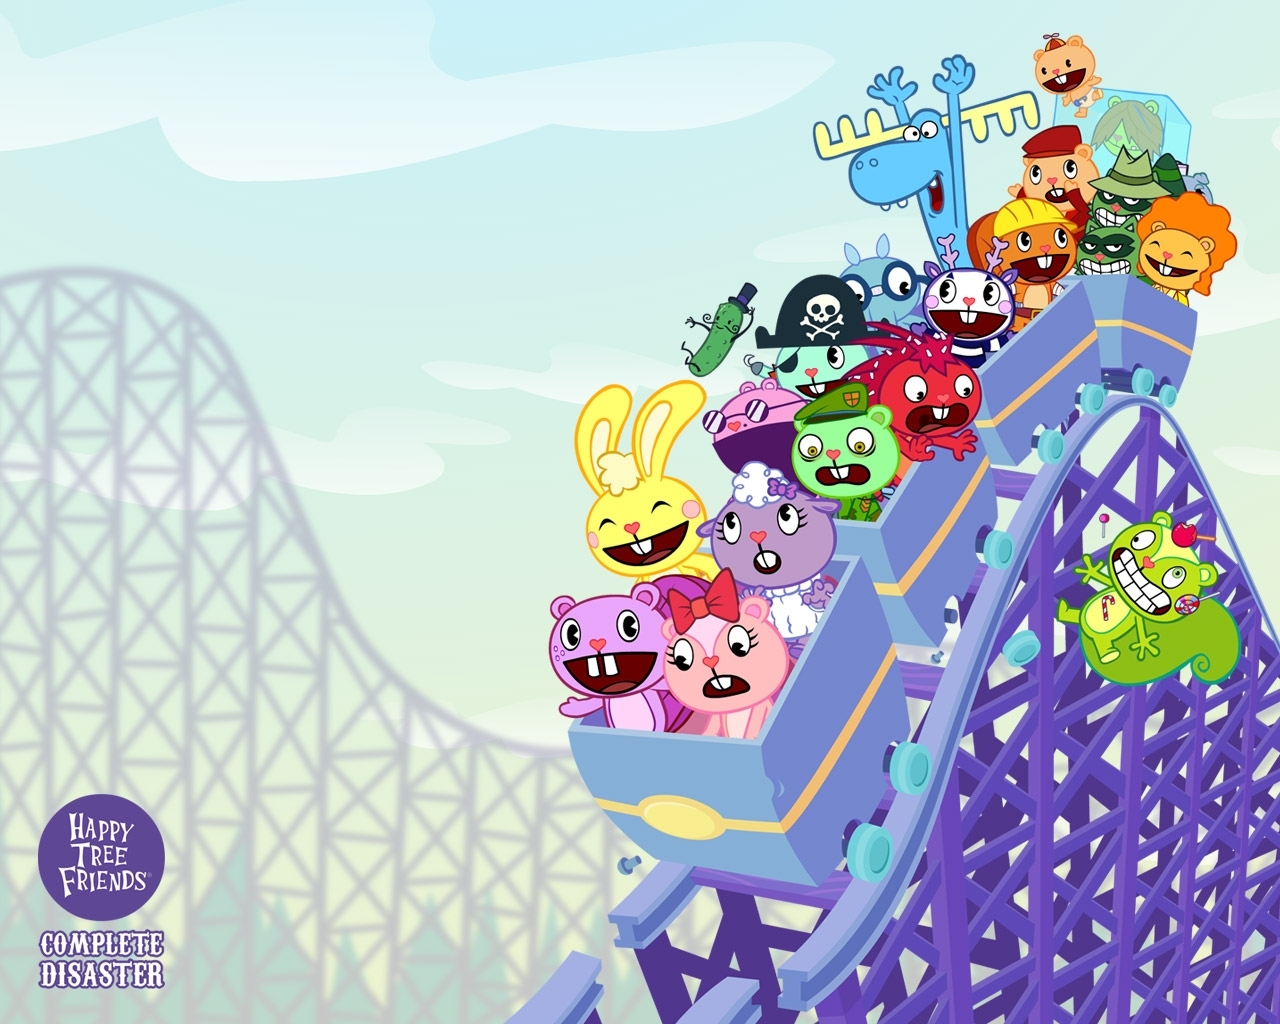 10 New Happy Tree Friends Wallpaper FULL HD 1920×1080 For PC Background